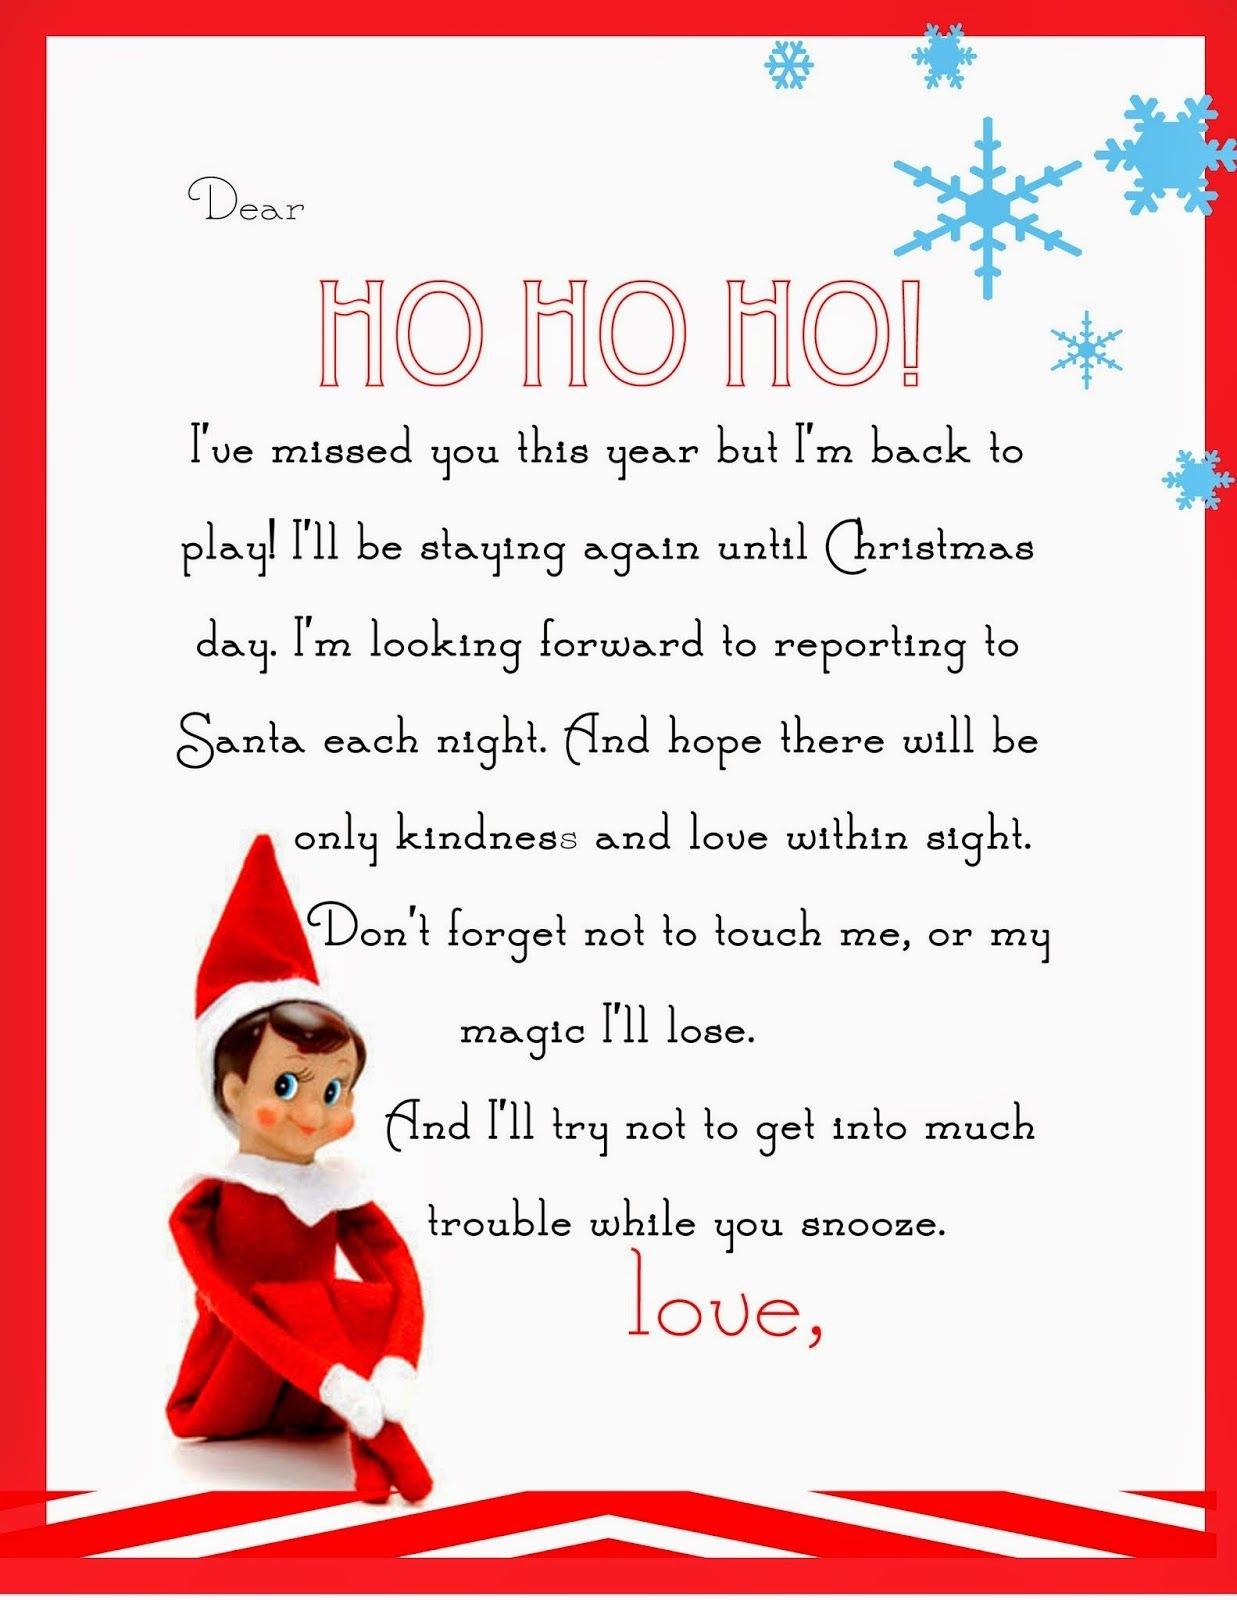 Elf On The Shelf Letter Free Printable  Christmas  Elf On The intended for Elf On The Shelf Letter From Santa Template